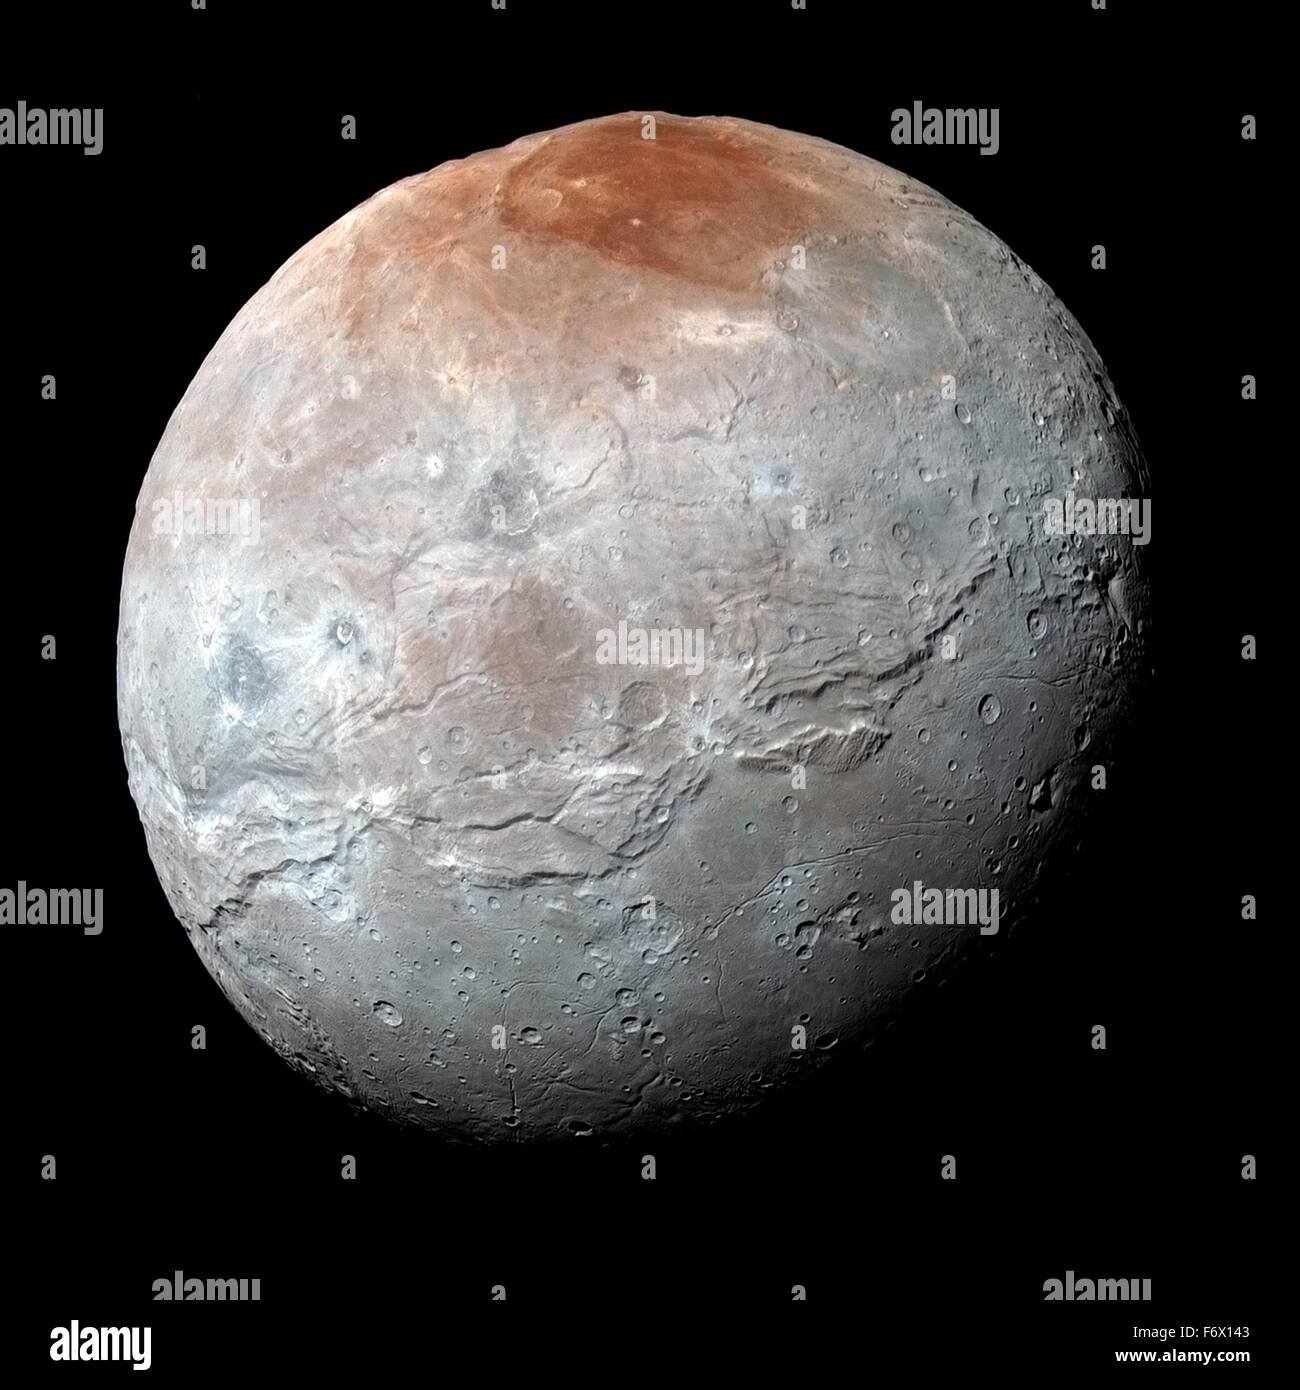 Detailed color image of Charon, the largest of Pluto's moons captured July 14, 2015 by the New Horizons space probe. Charon is the largest moon relative to its planet in the solar system. Stock Photo